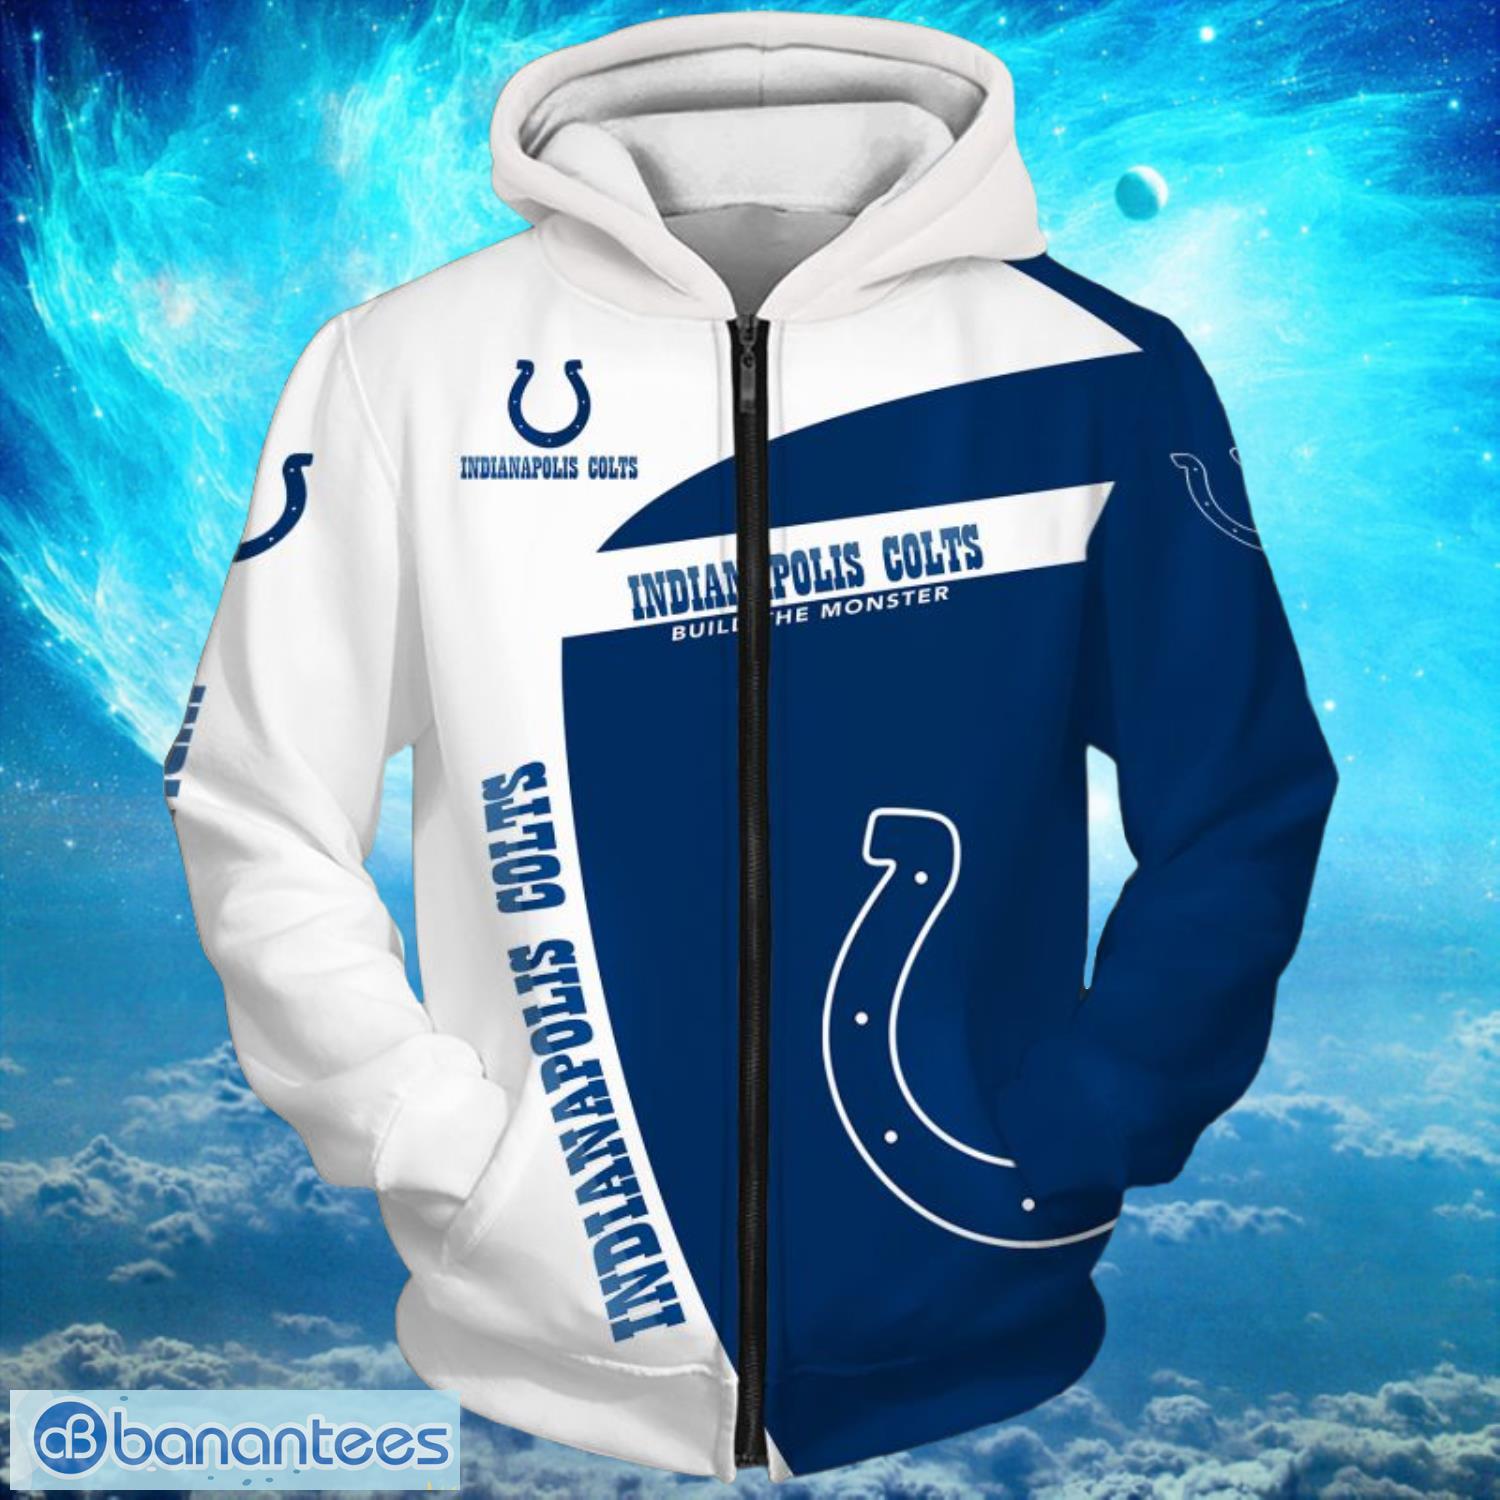 Indianapolis Colts Light Type Build the Monster Hoodies Print Full Product Photo 1